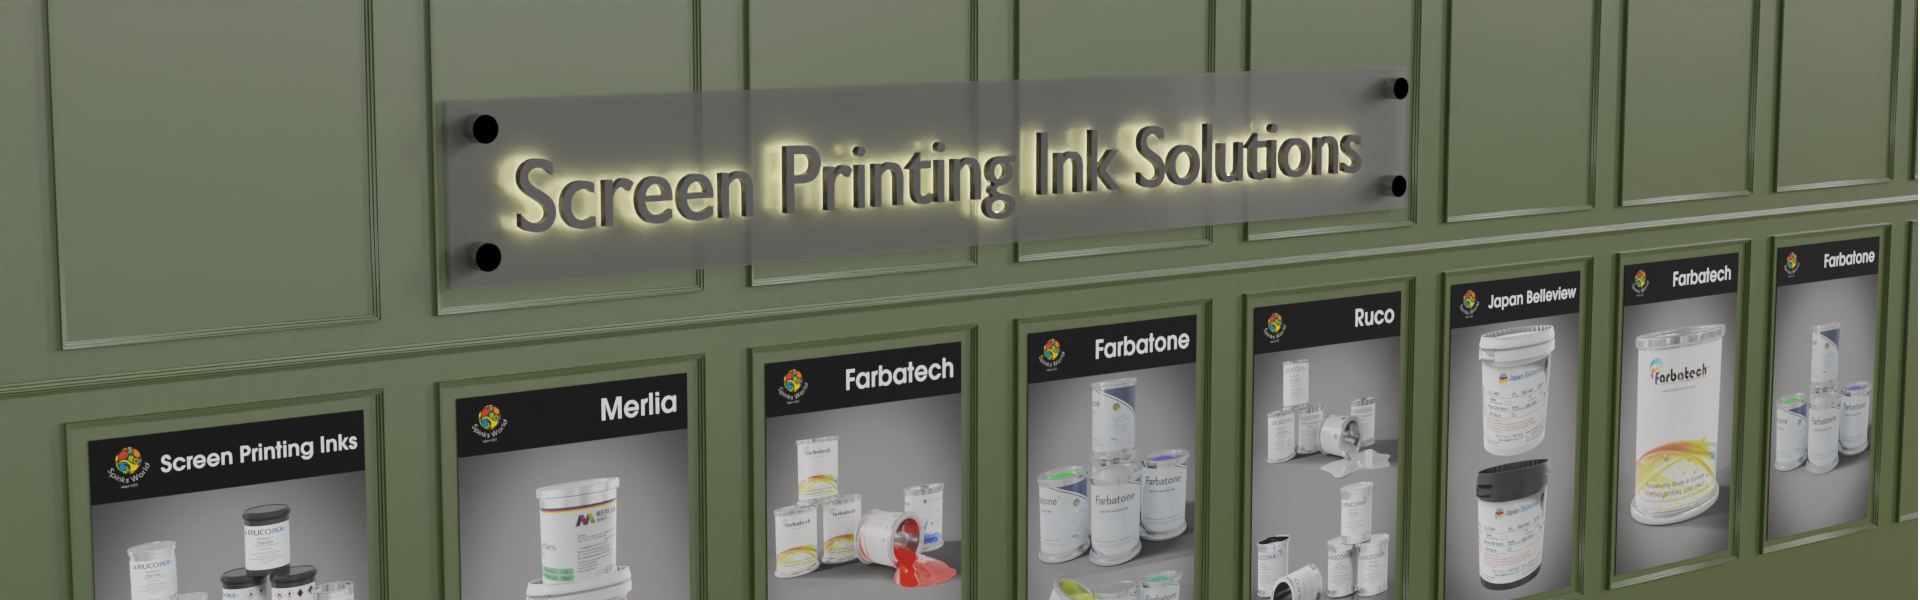 screen printing ink solution 